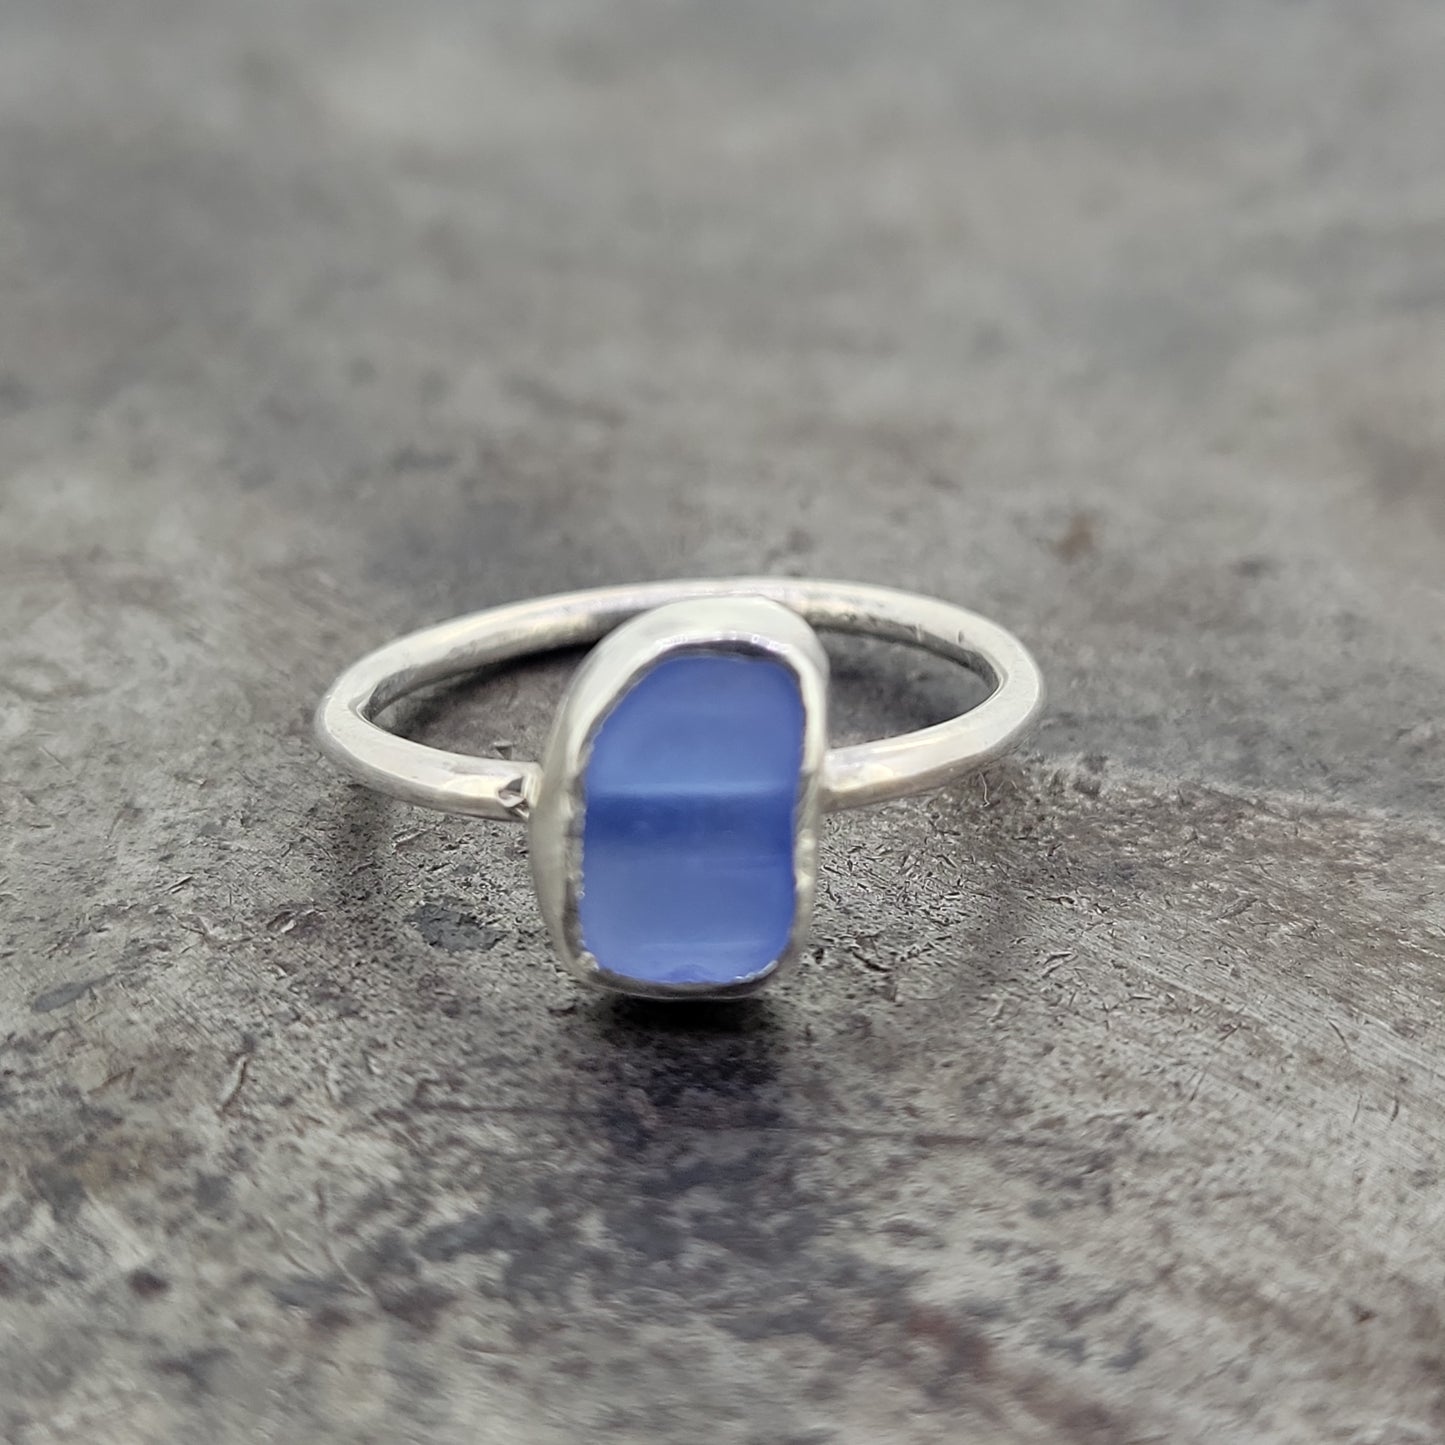 Handmade Sterling Silver and Blue Sesglass Ring